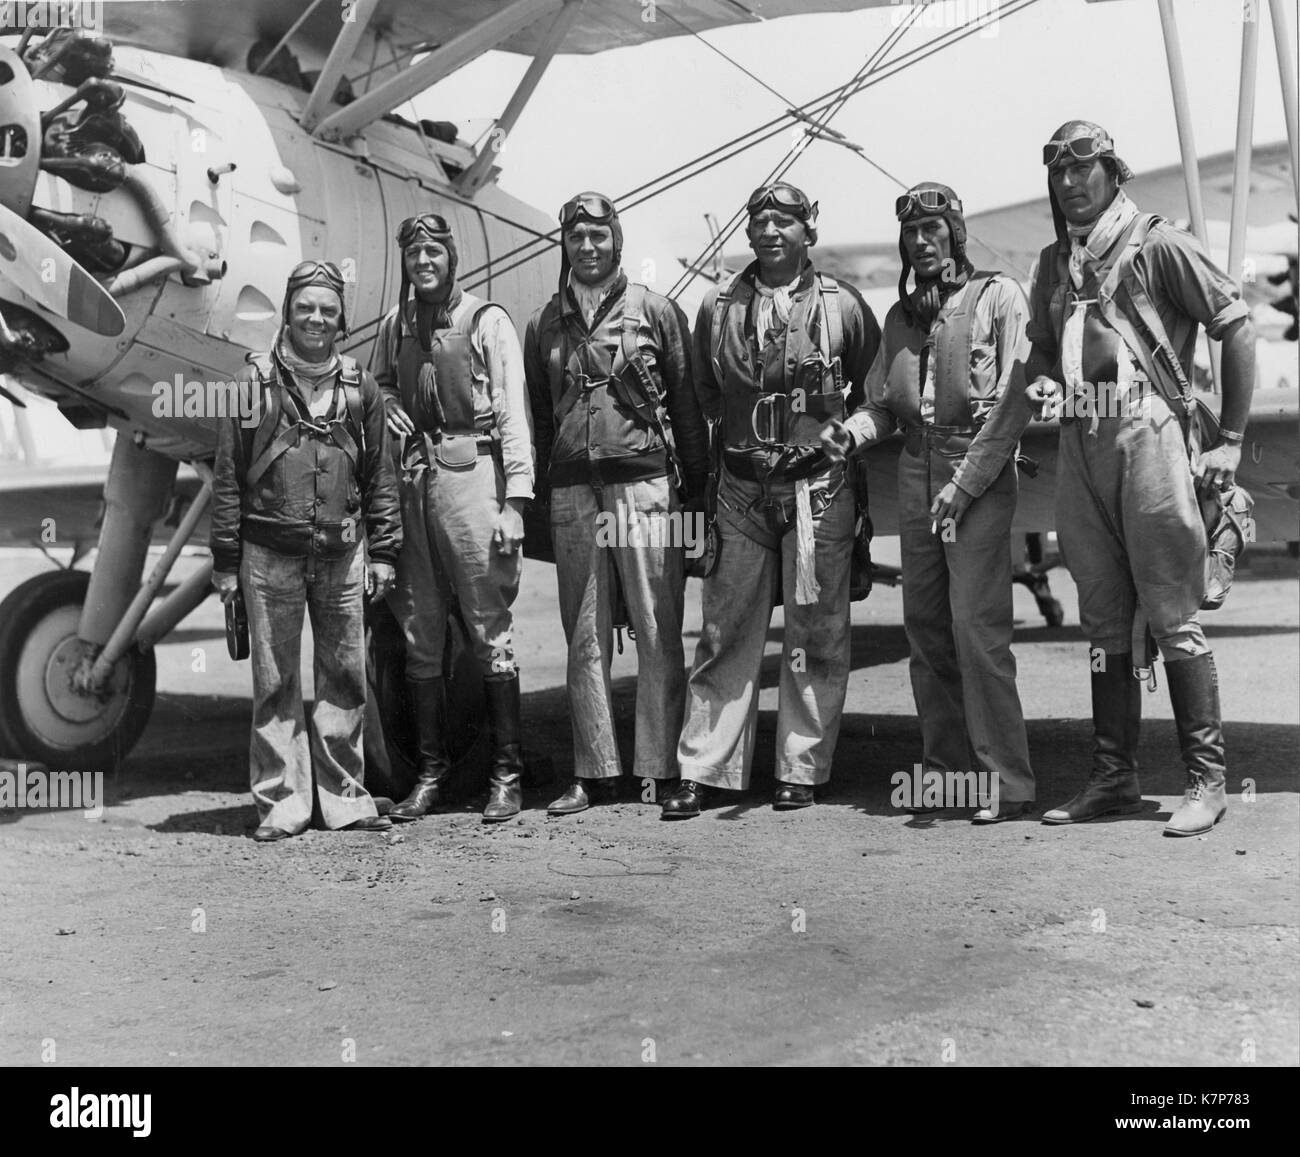 Actors Cliff Edwards (far left), Clark Gable, and Wallace Beery (fourth and fifth from left), pose with Naval Aviators Lt. John Thatch USN (second from left), Lt. Duckworth USN, and Lt. Southworth, USN (second from right and far right) during the making of the motion picture, Hell Divers. NAS North Island, California, Sept 16, 1931. Stock Photo